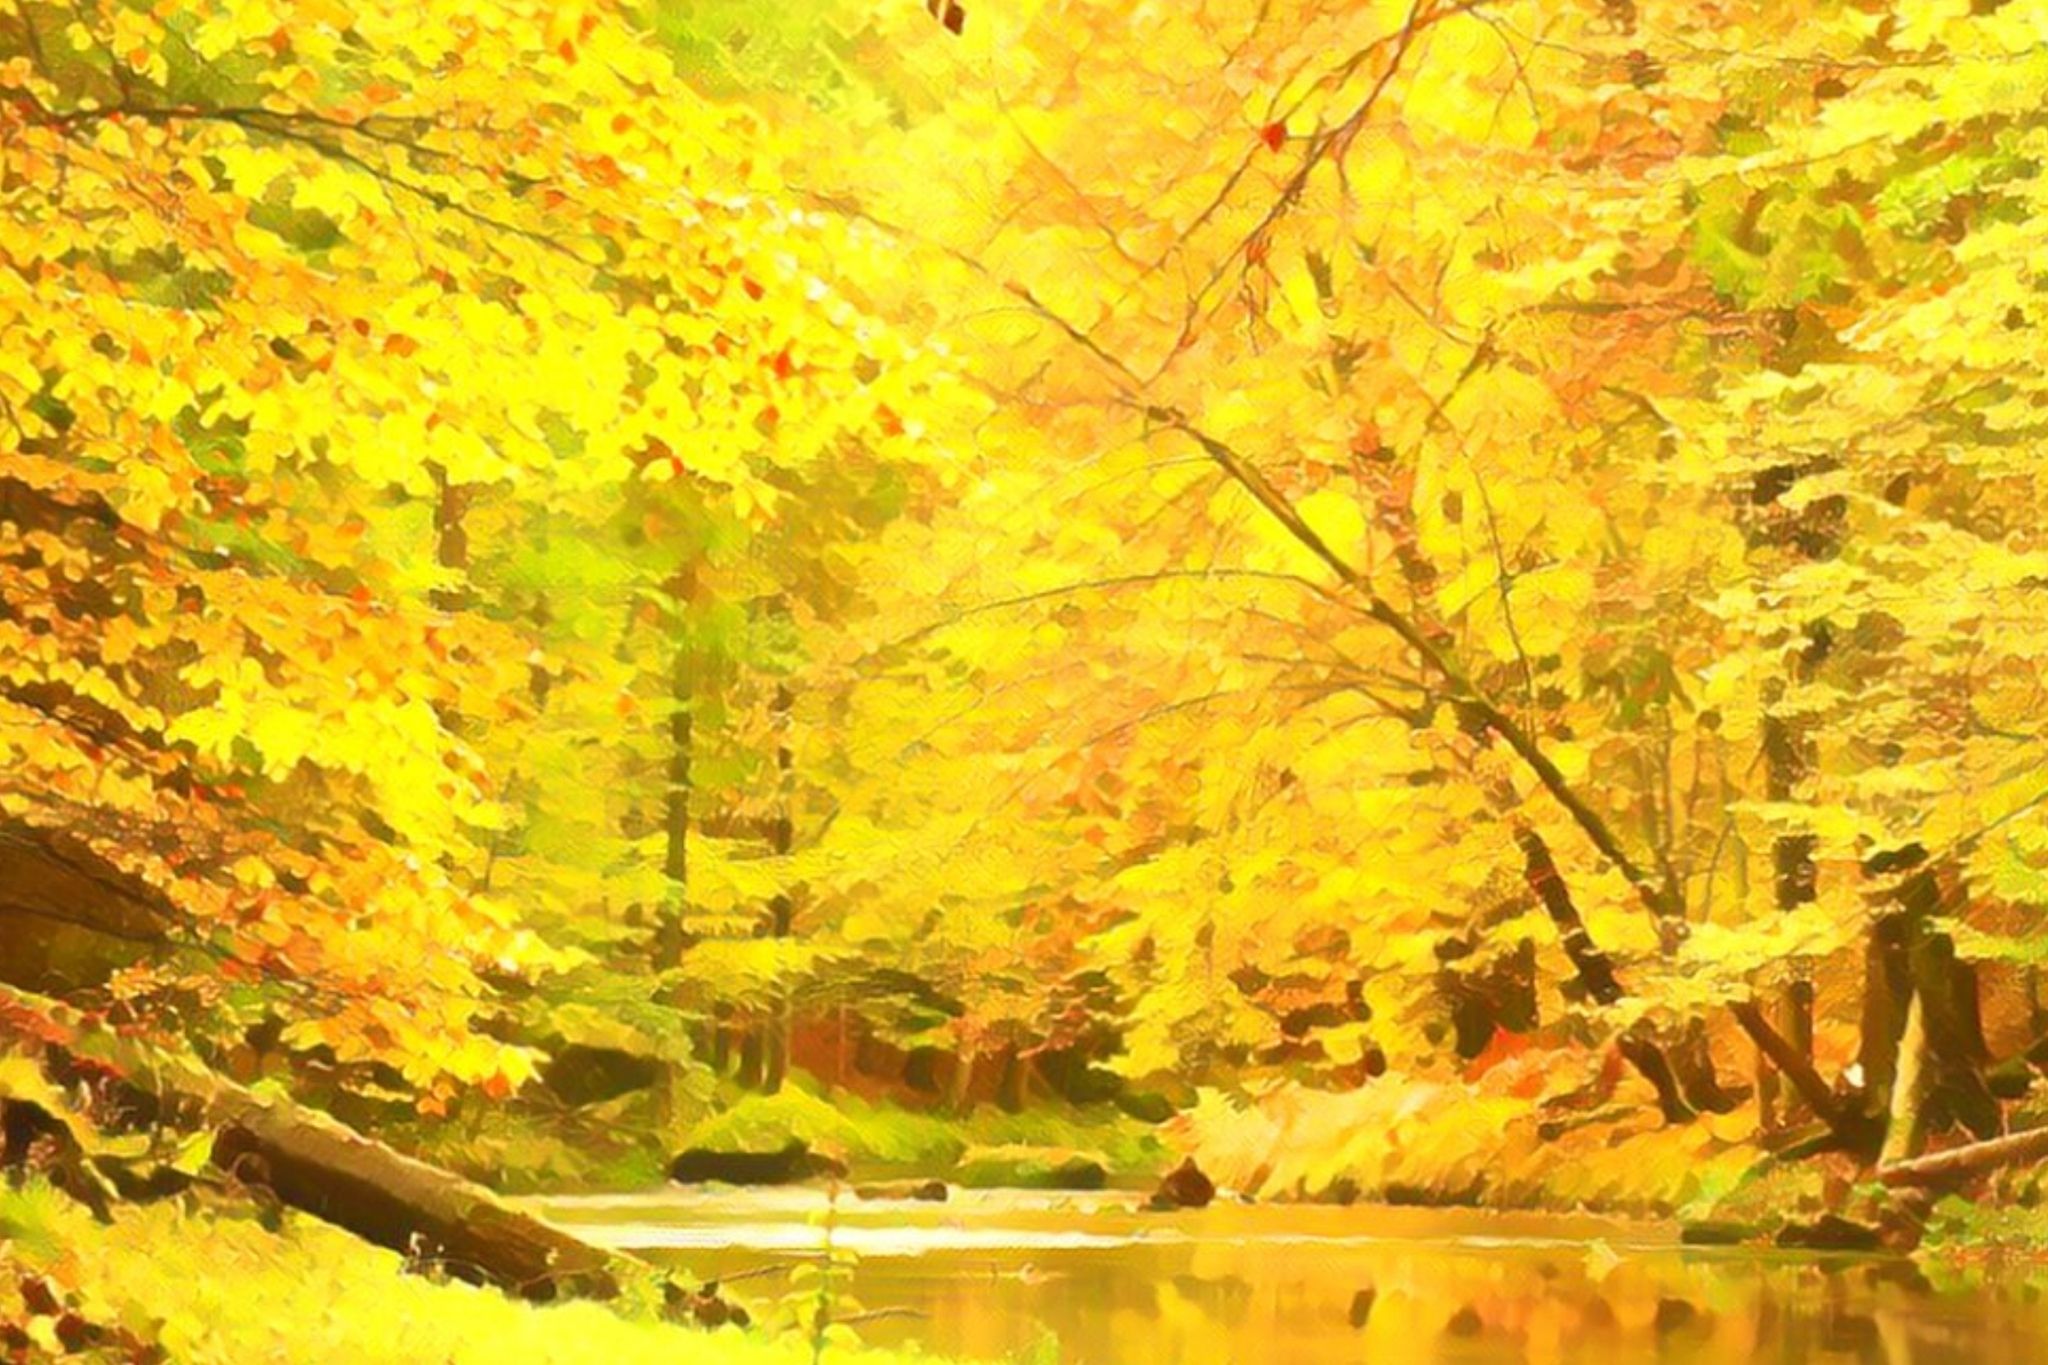 yellow trees over river - stylized painting